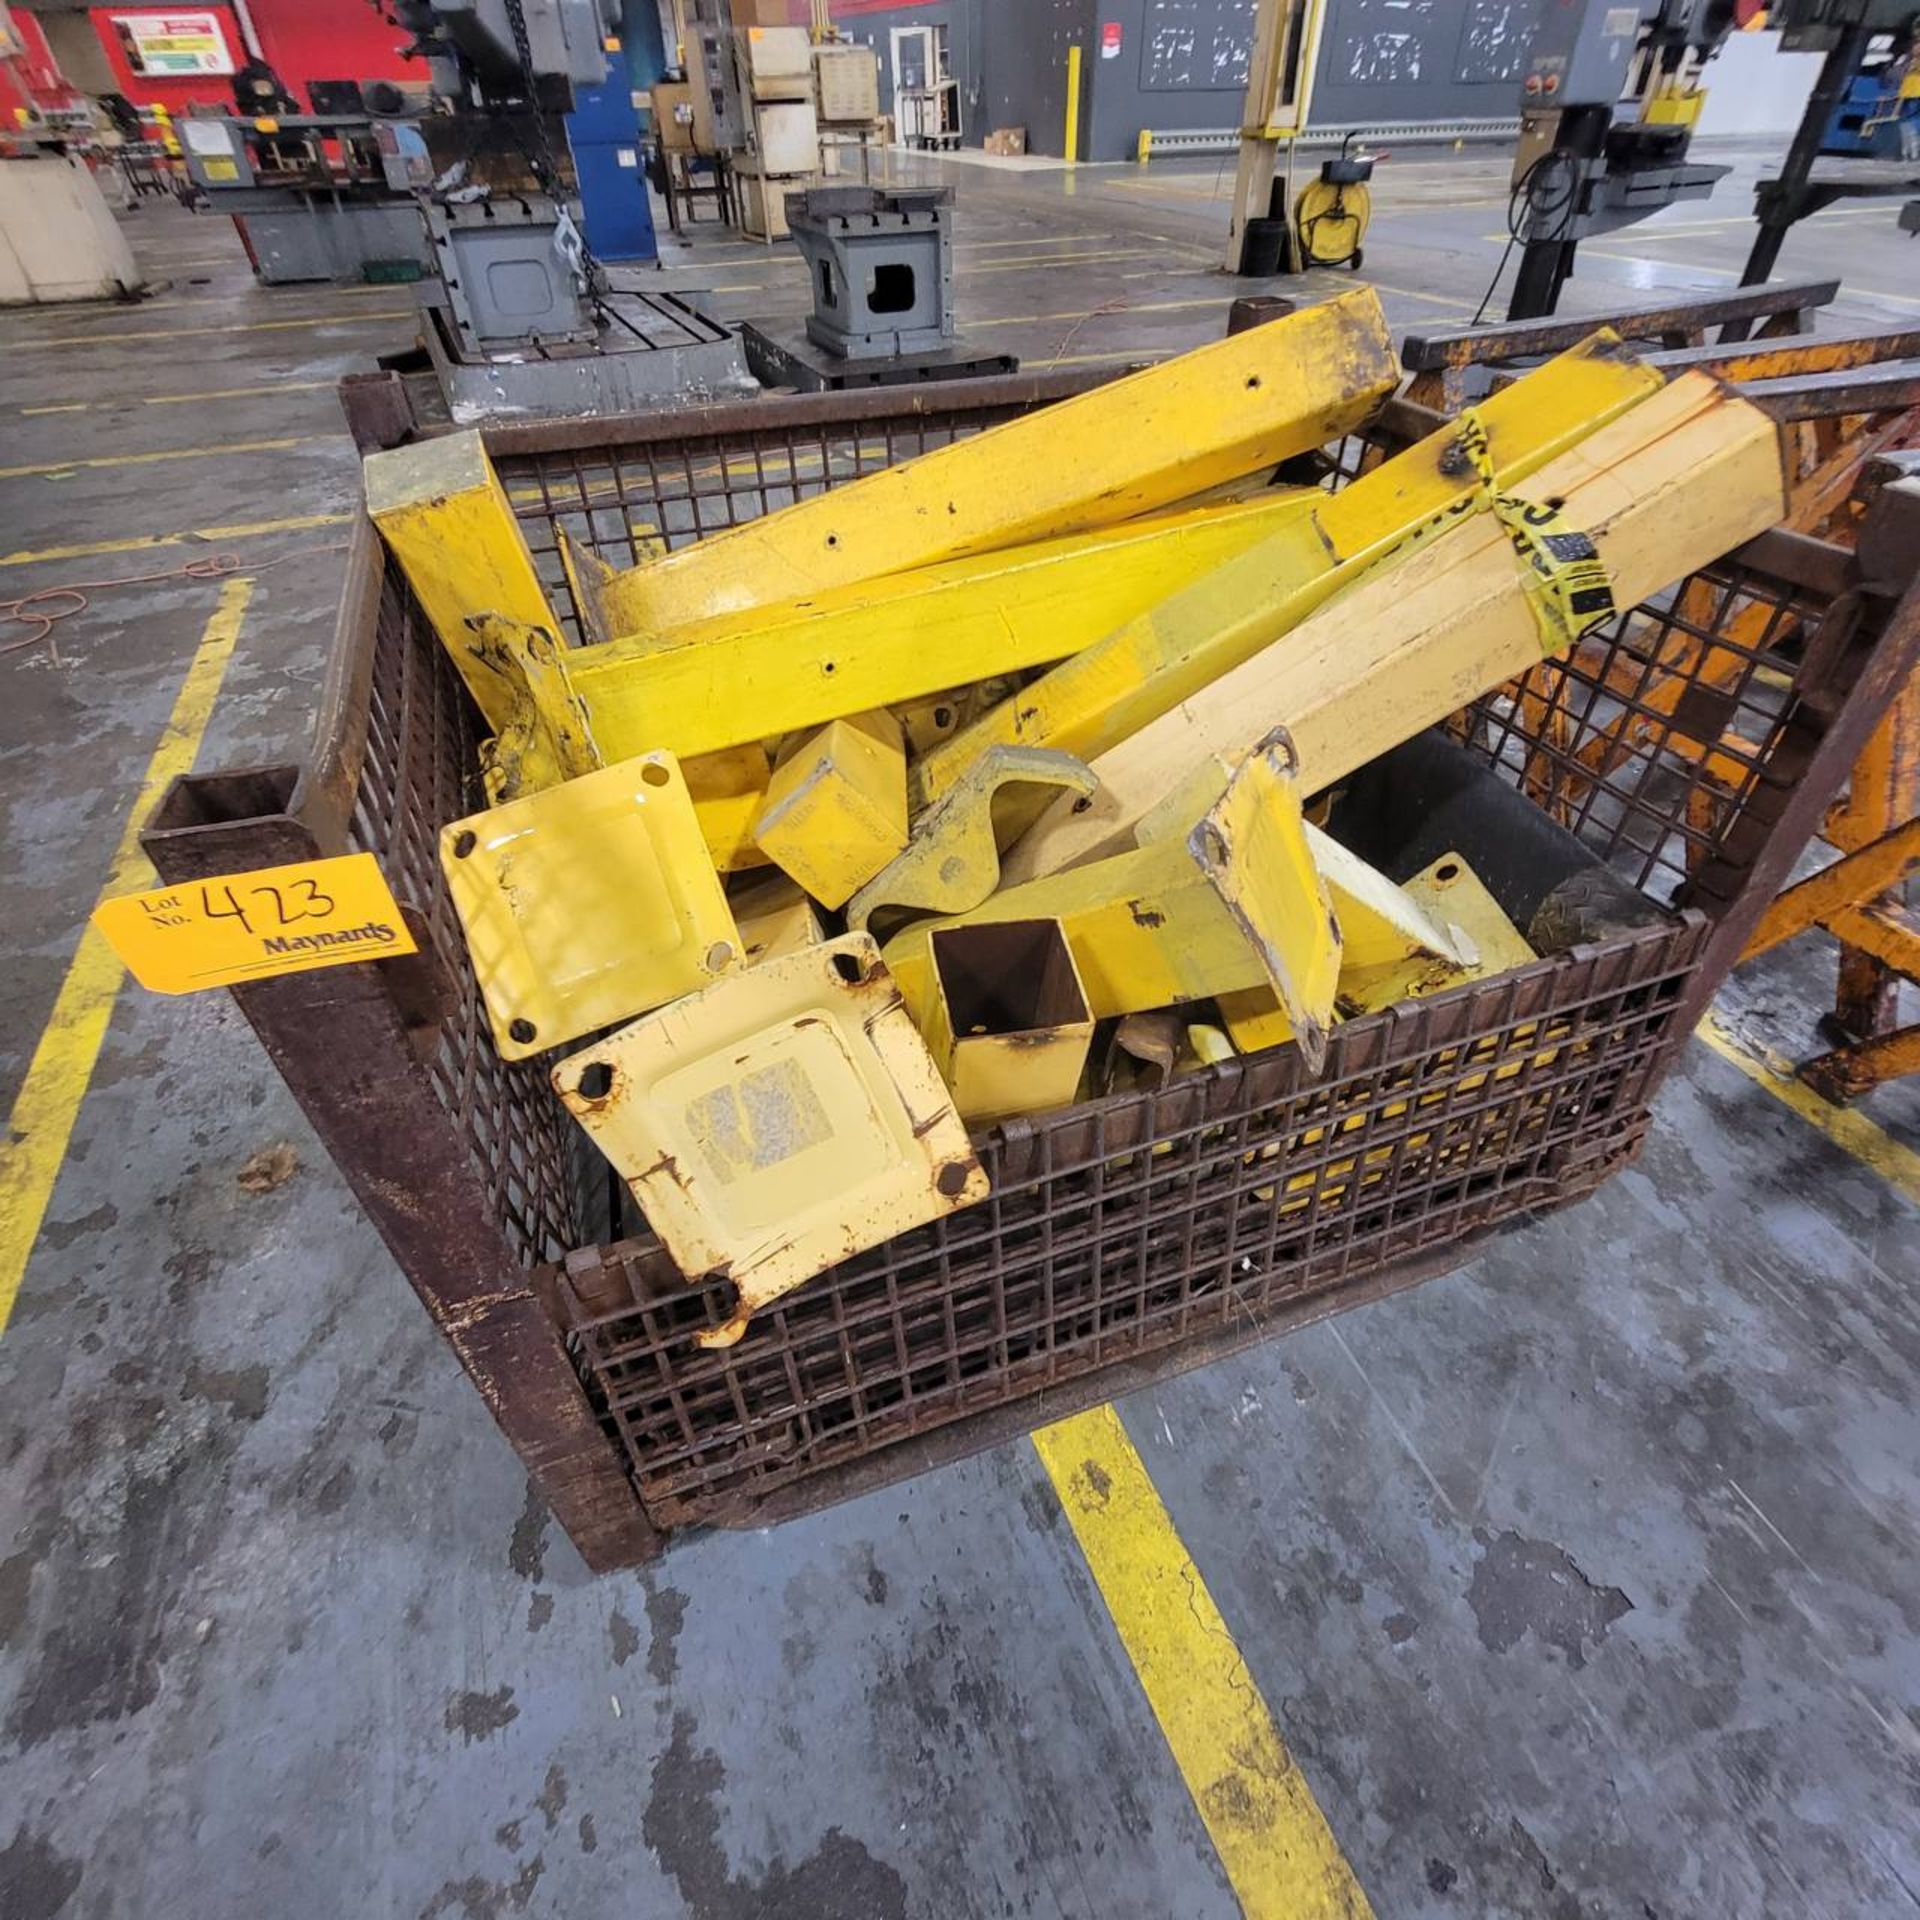 Crate of warehouse bump guards